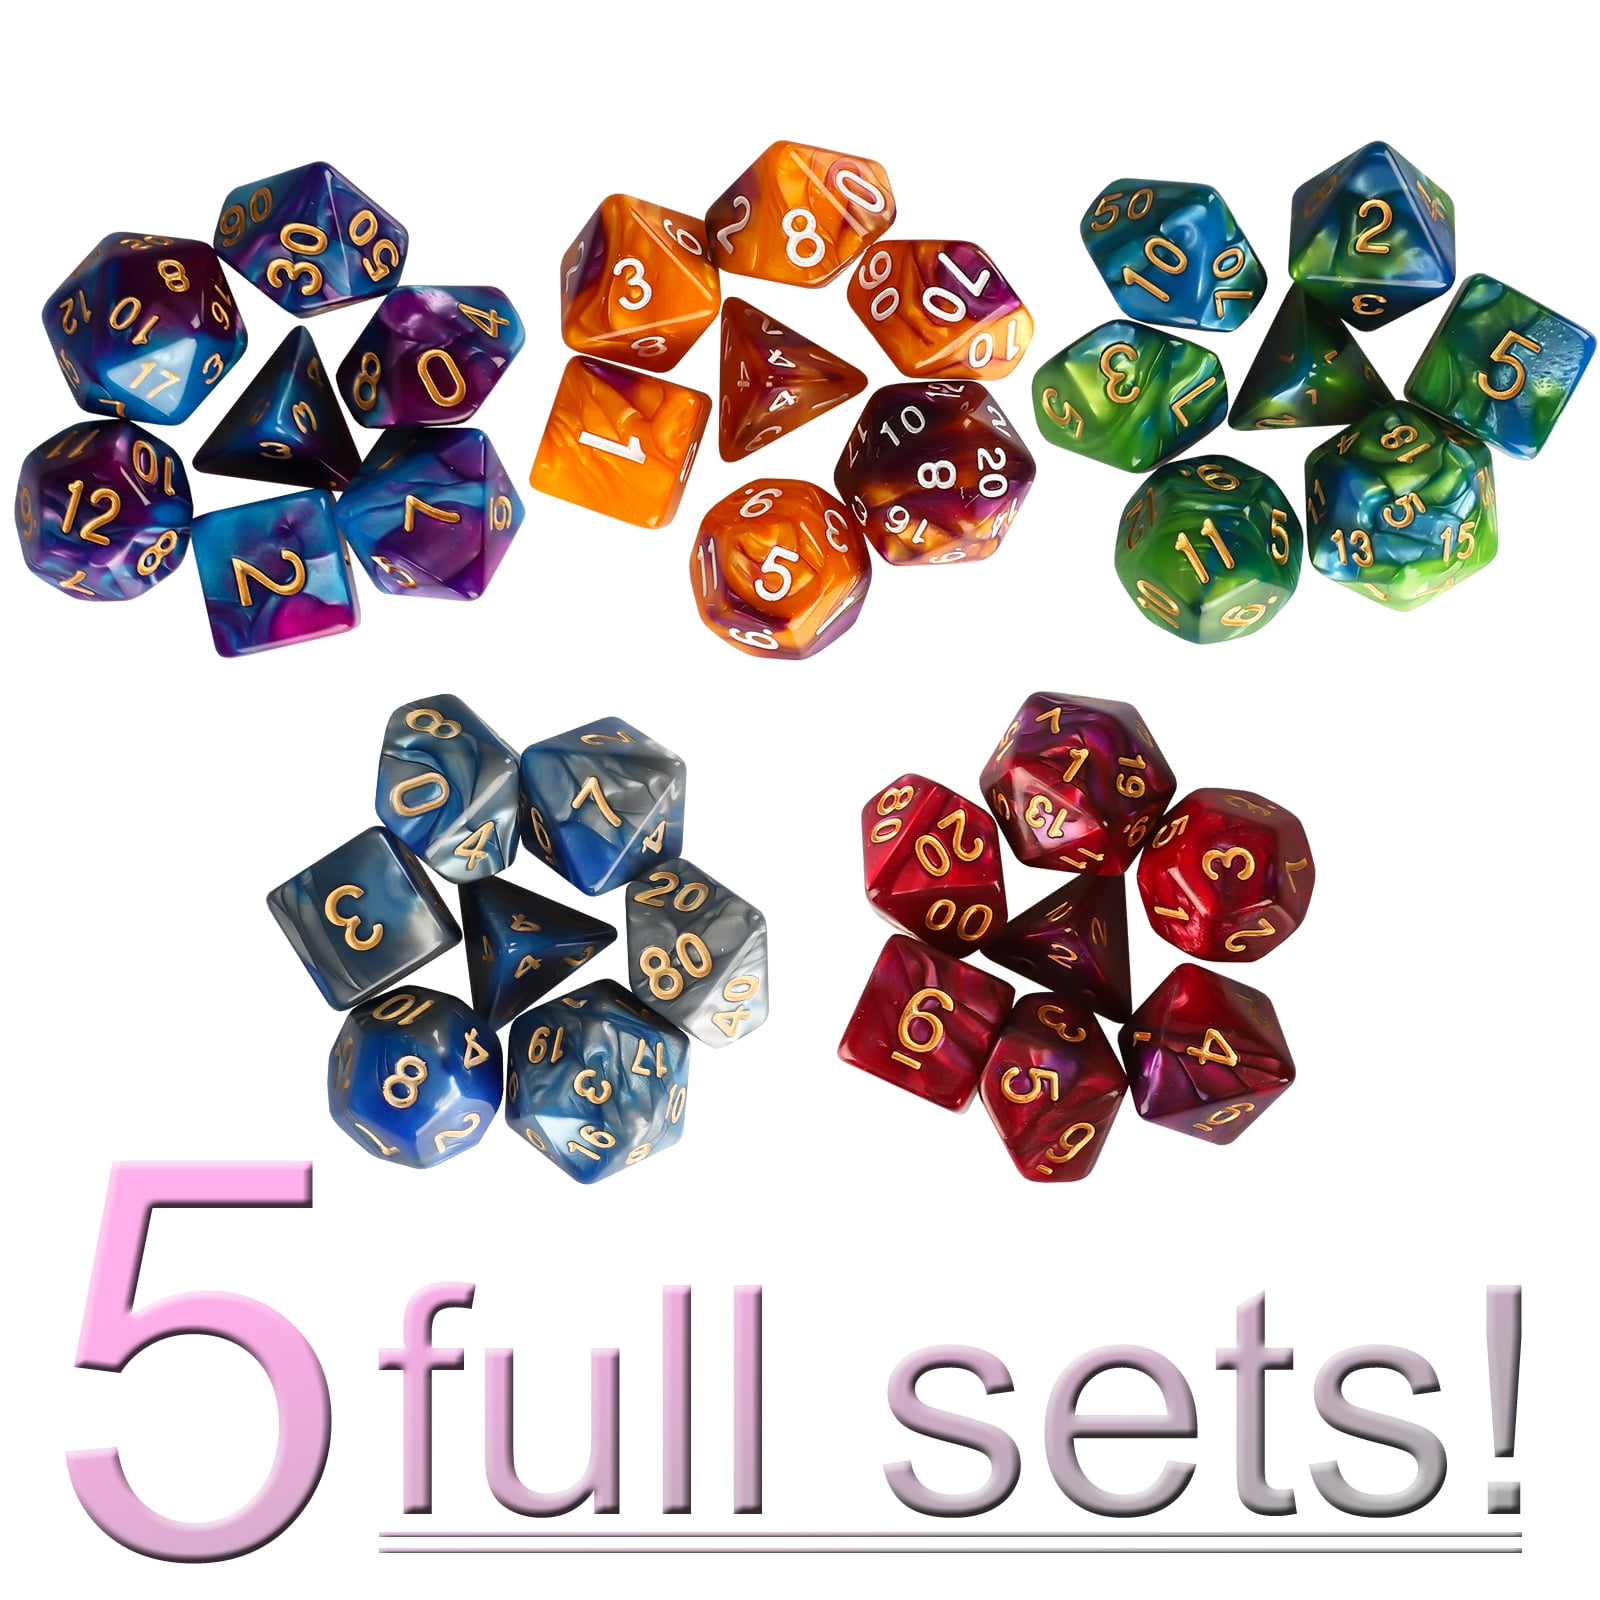 YIFEIJIAO Dices Beads 7 Pieces Resin Polyhedral Dices Numbers for DND RPG MTG Dials Desktop Table Board Desktop Table Board Game Dice Toys-blue